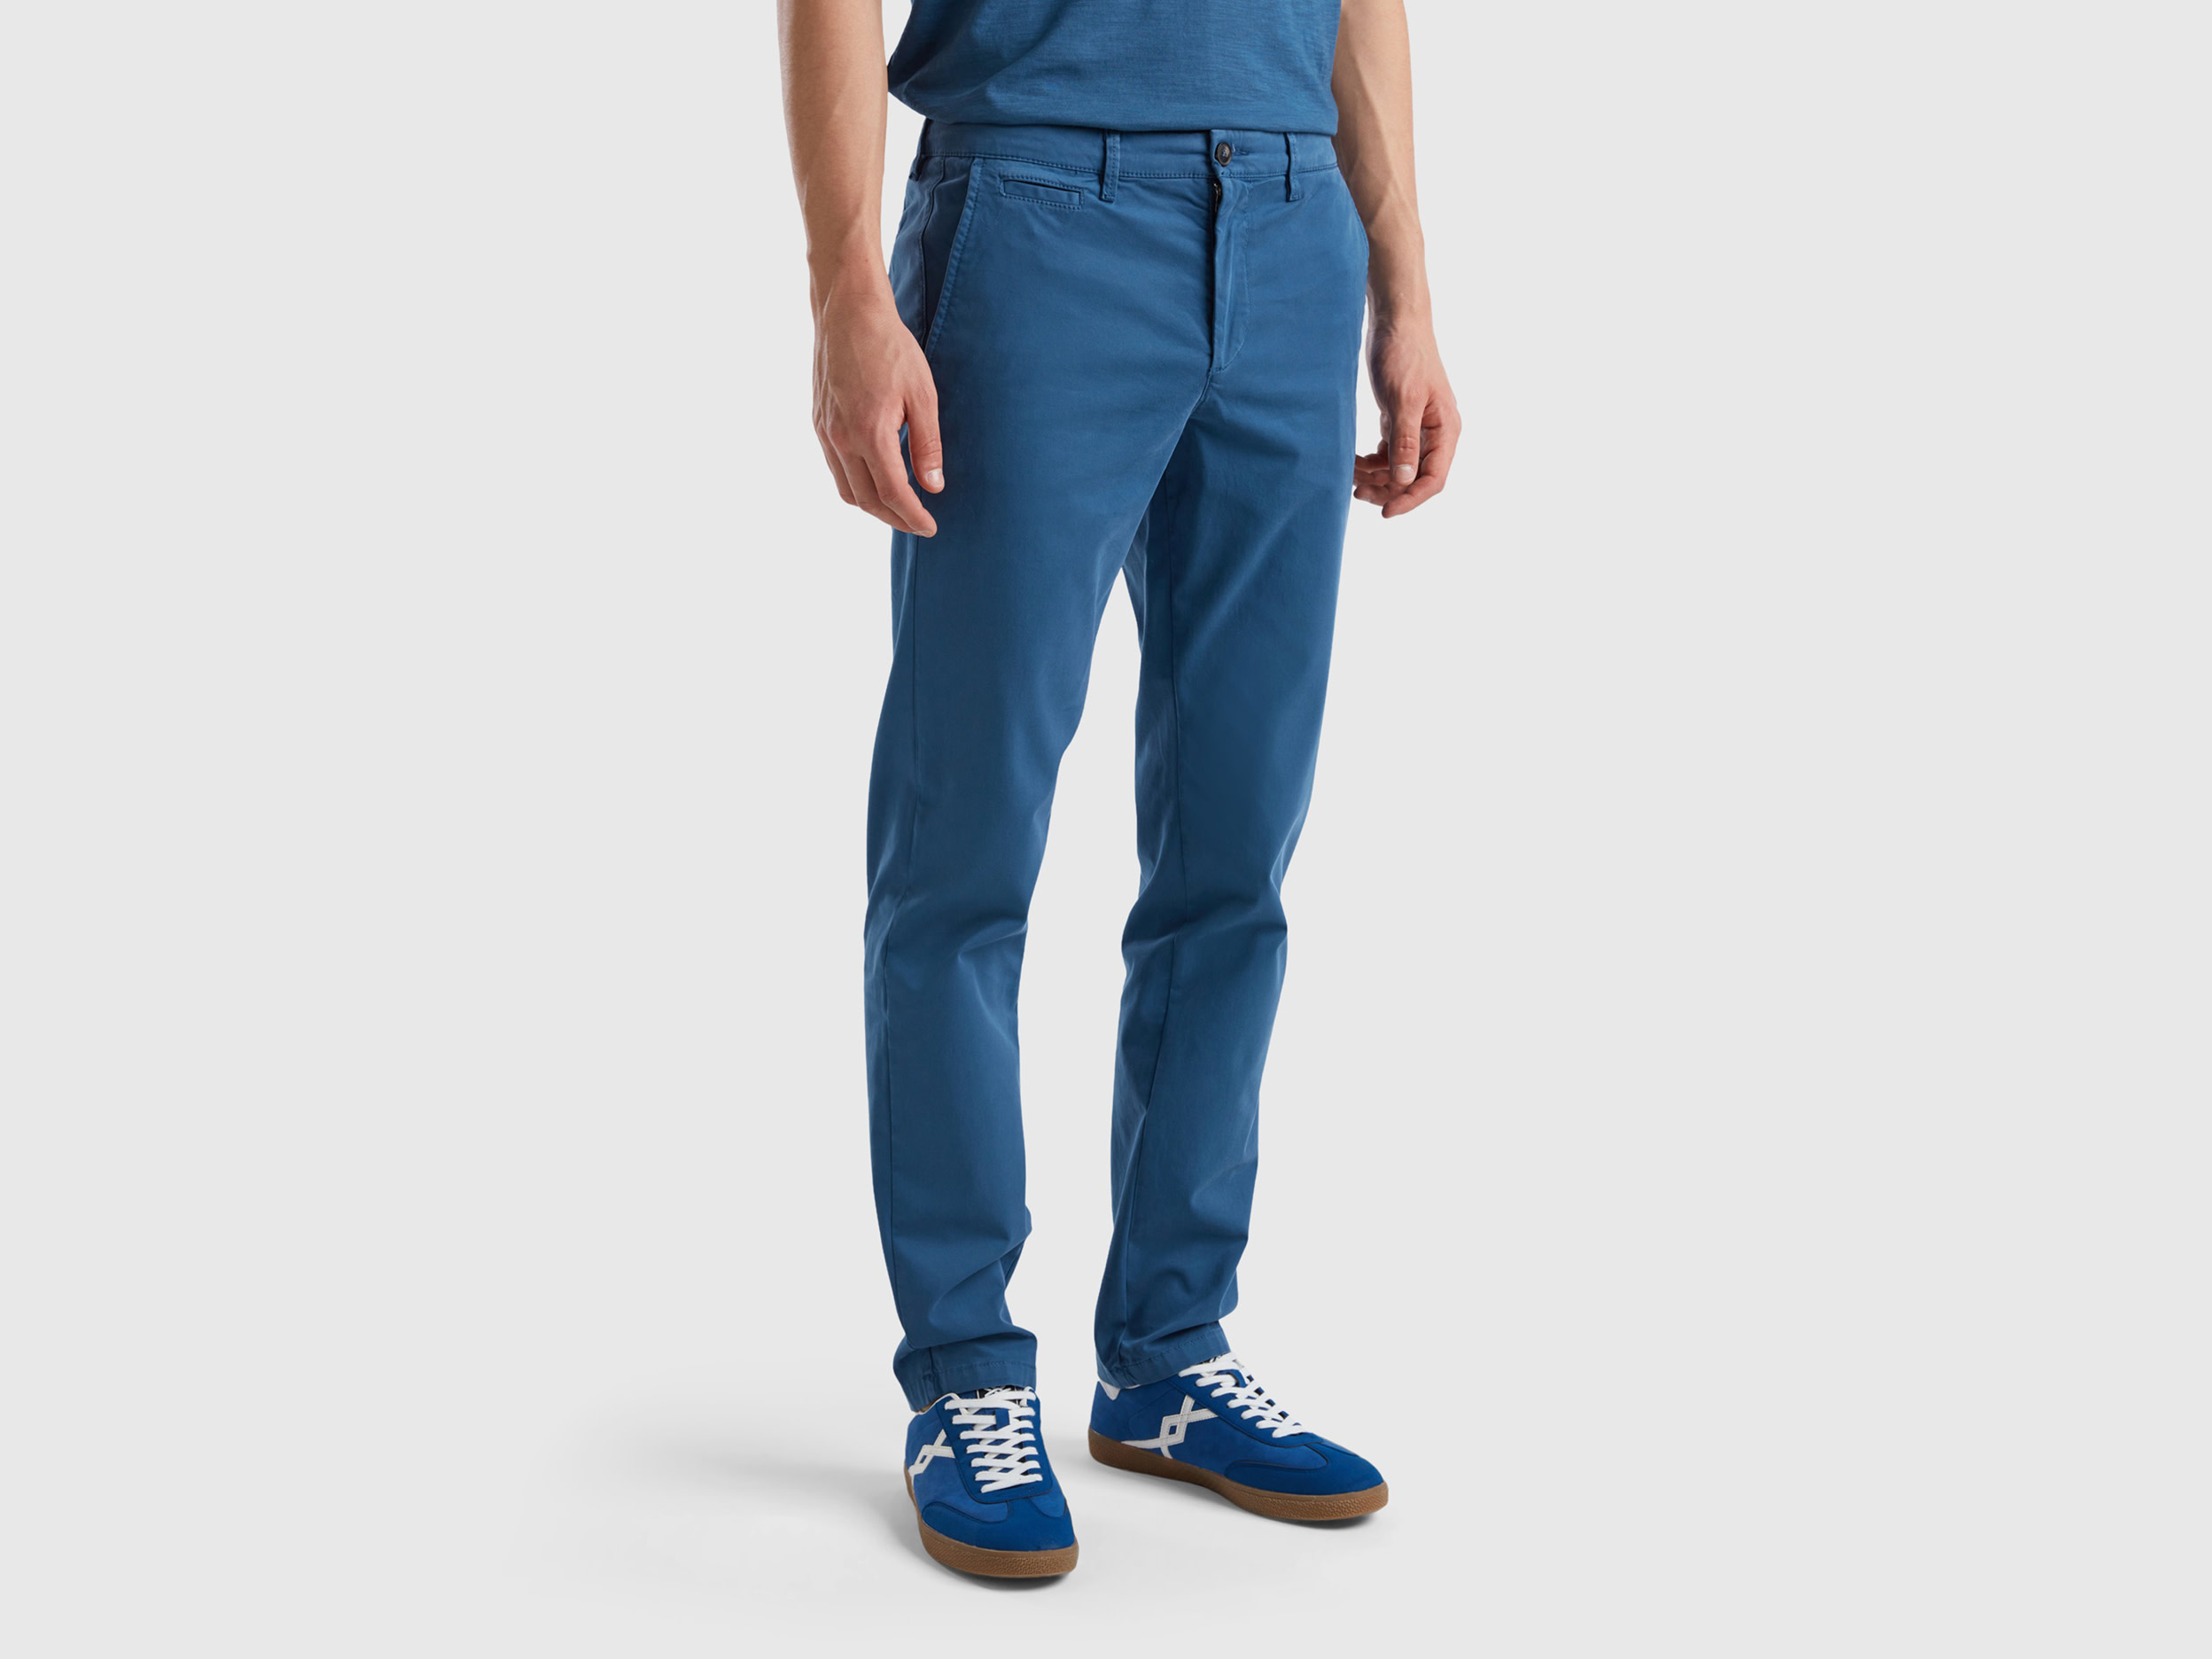 Benetton, Air Force Blue Slim Fit Chinos, size 36, Air Force Blue, Men